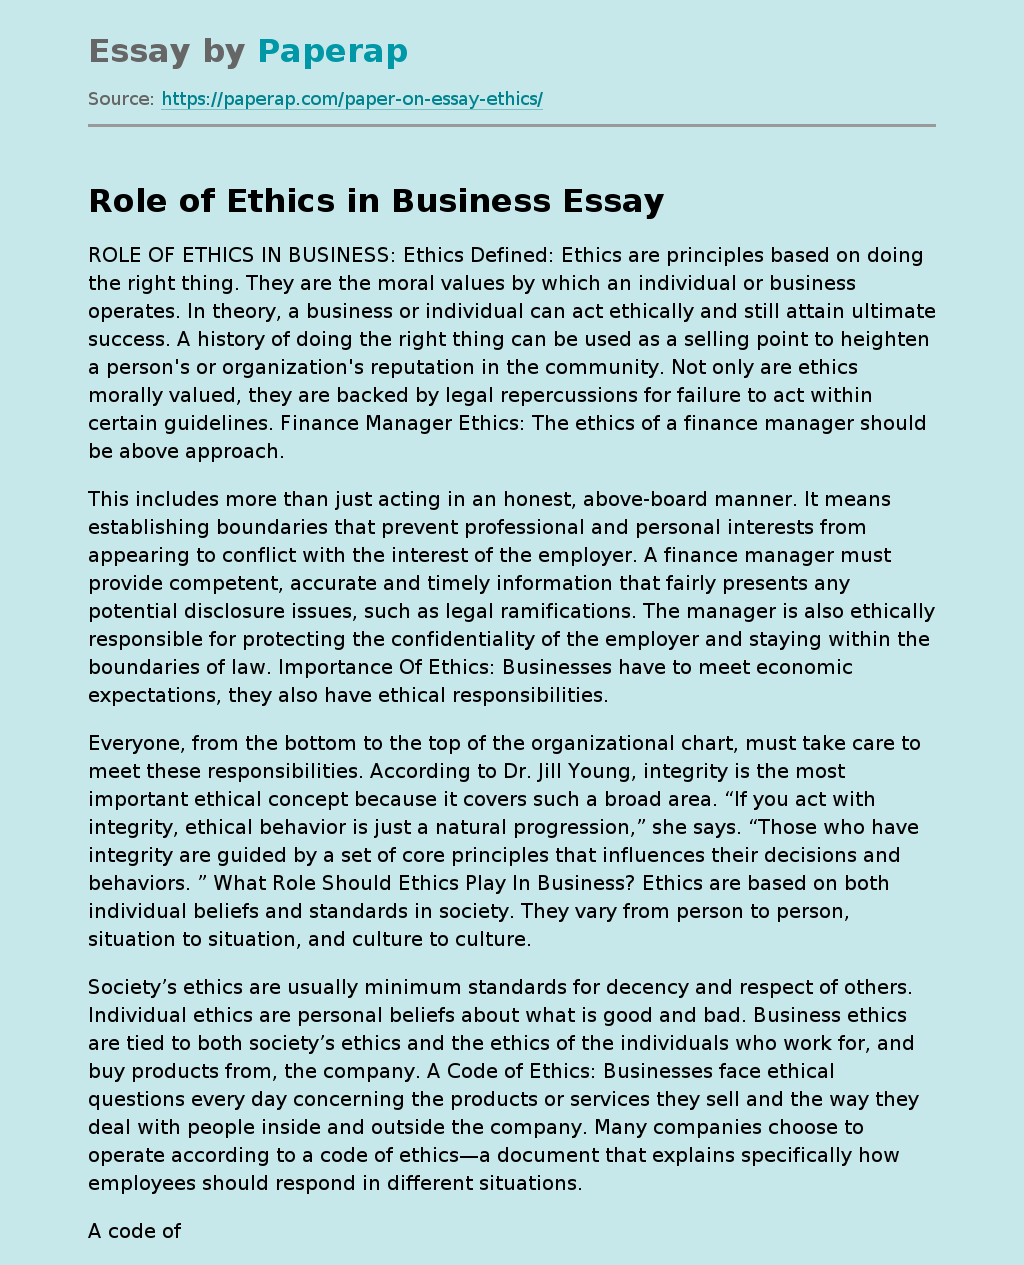 importance of business ethics